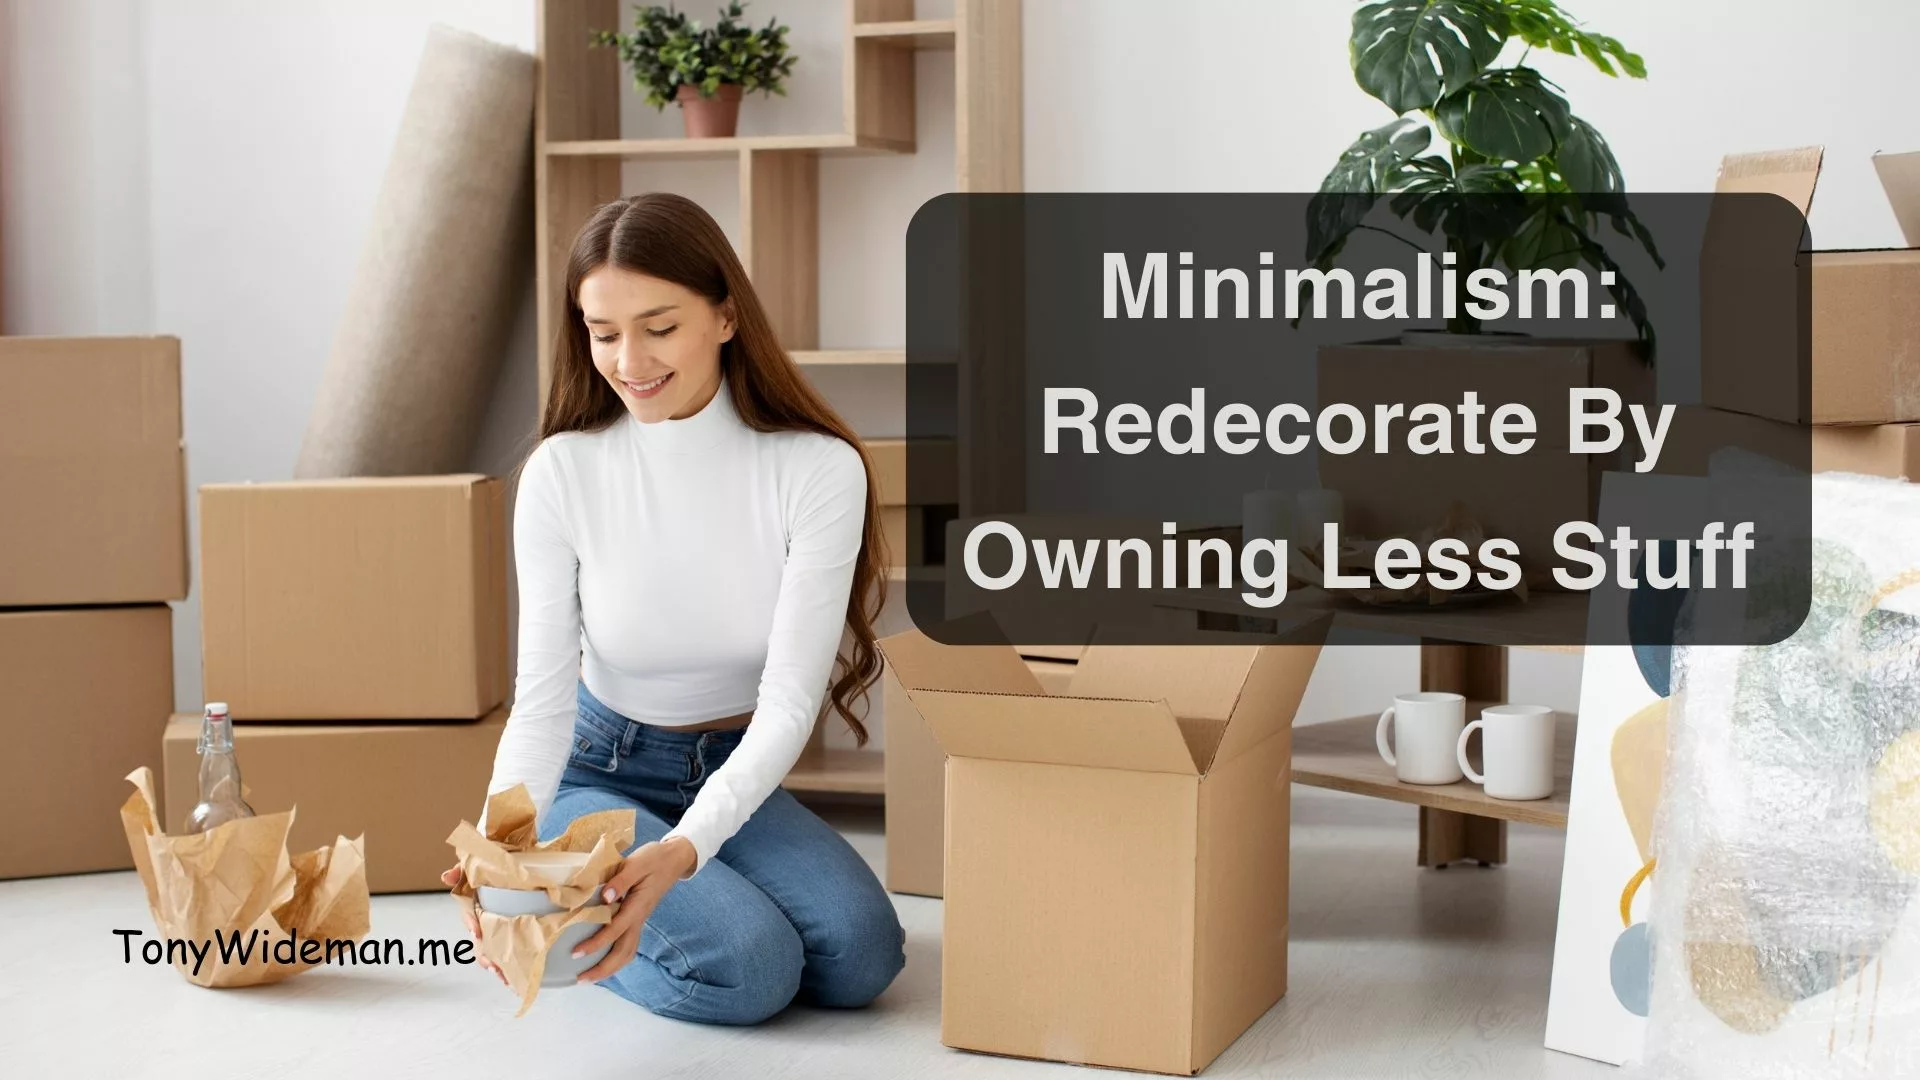 Minimalism: Redecorate By Owning Less Stuff